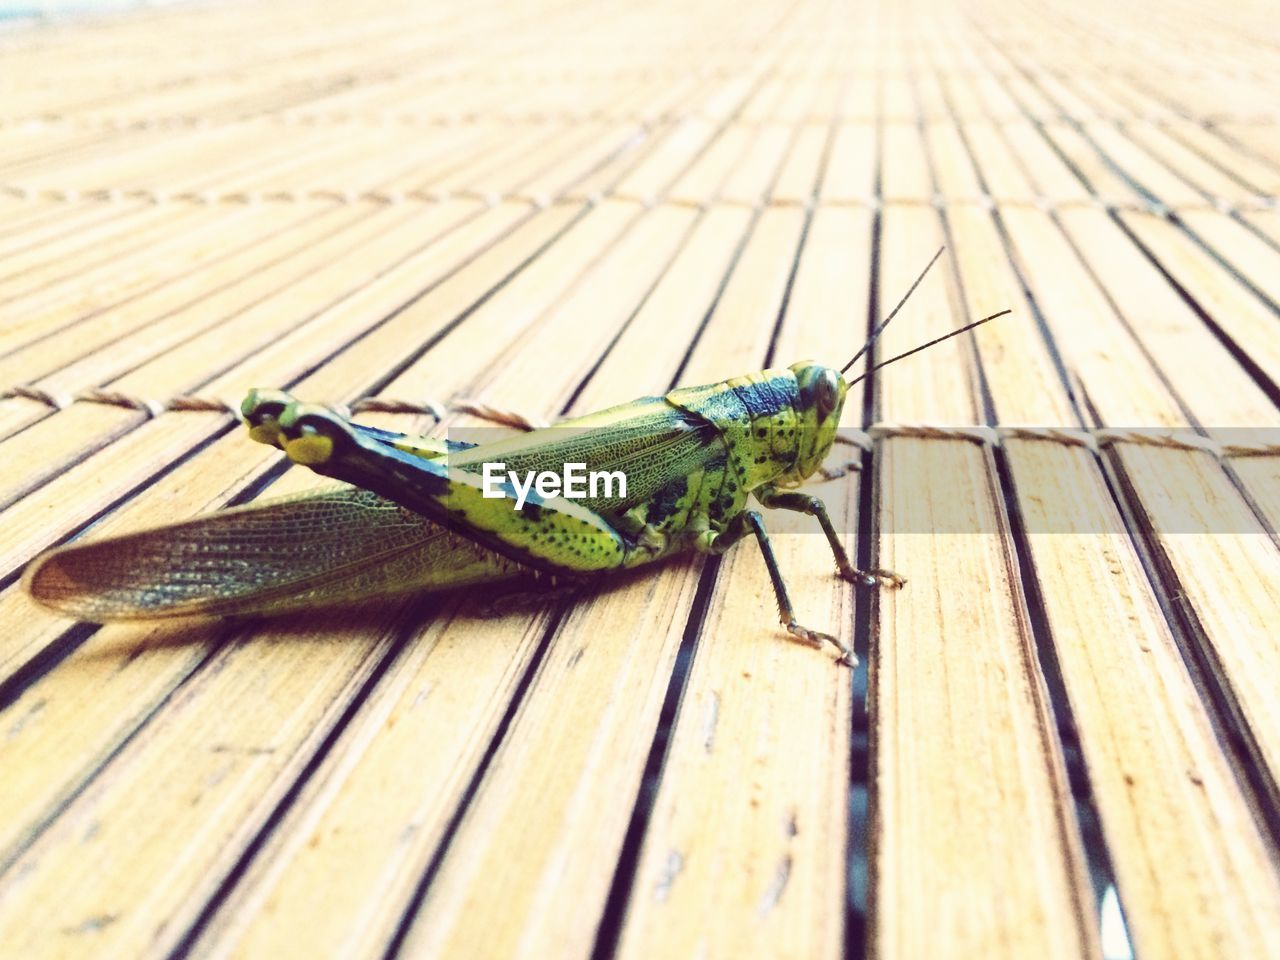 CLOSE-UP OF GRASSHOPPER ON WOODEN PLANK